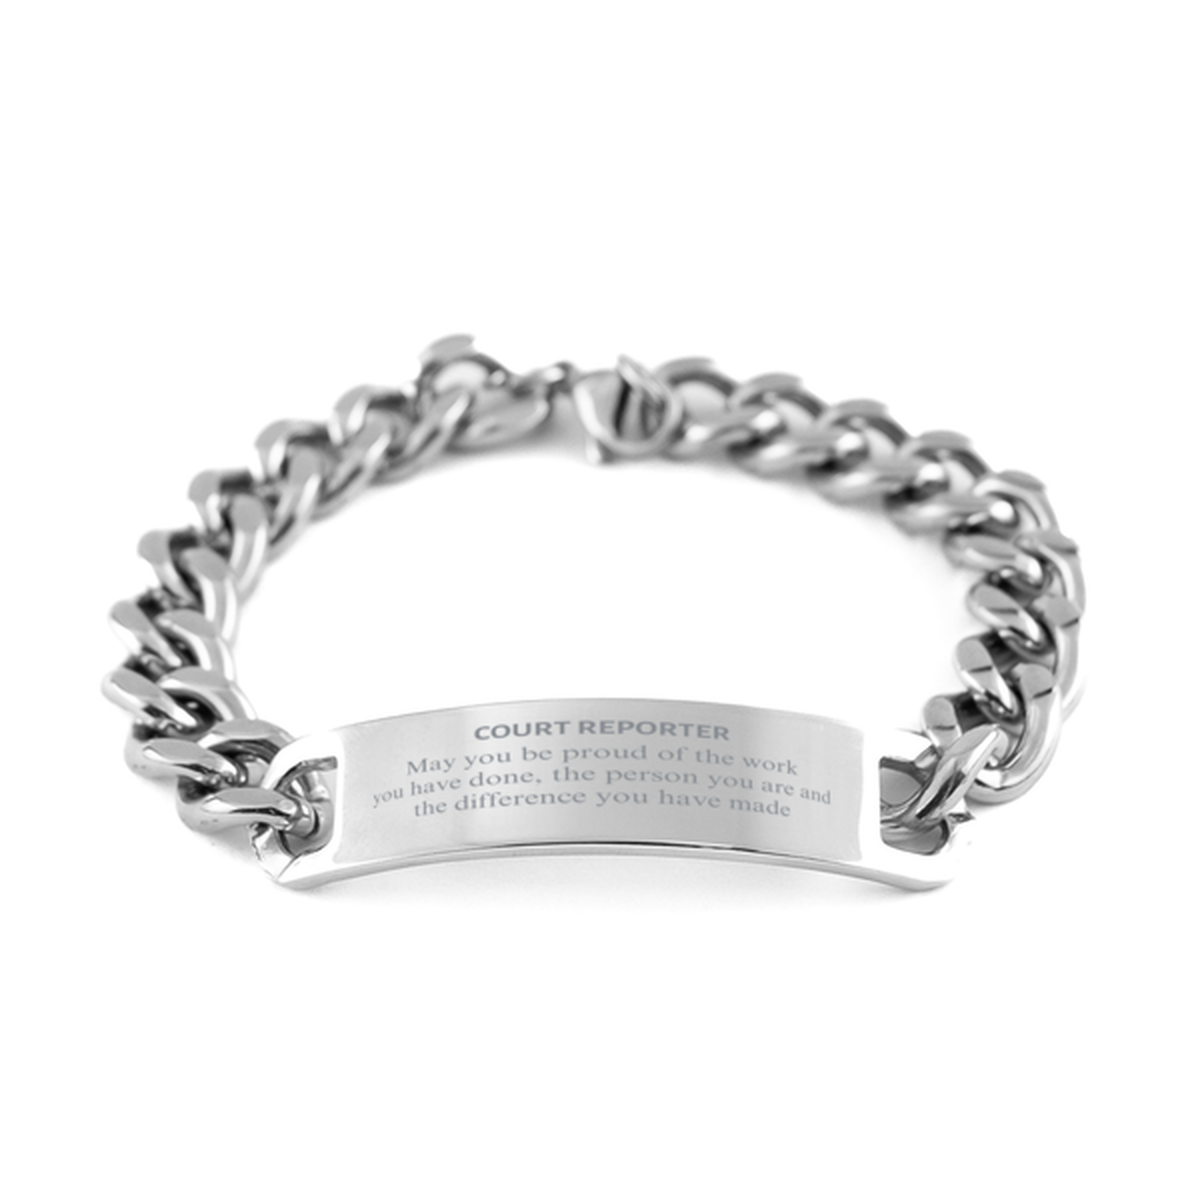 Court Reporter May you be proud of the work you have done, Retirement Court Reporter Cuban Chain Stainless Steel Bracelet for Colleague Appreciation Gifts Amazing for Court Reporter